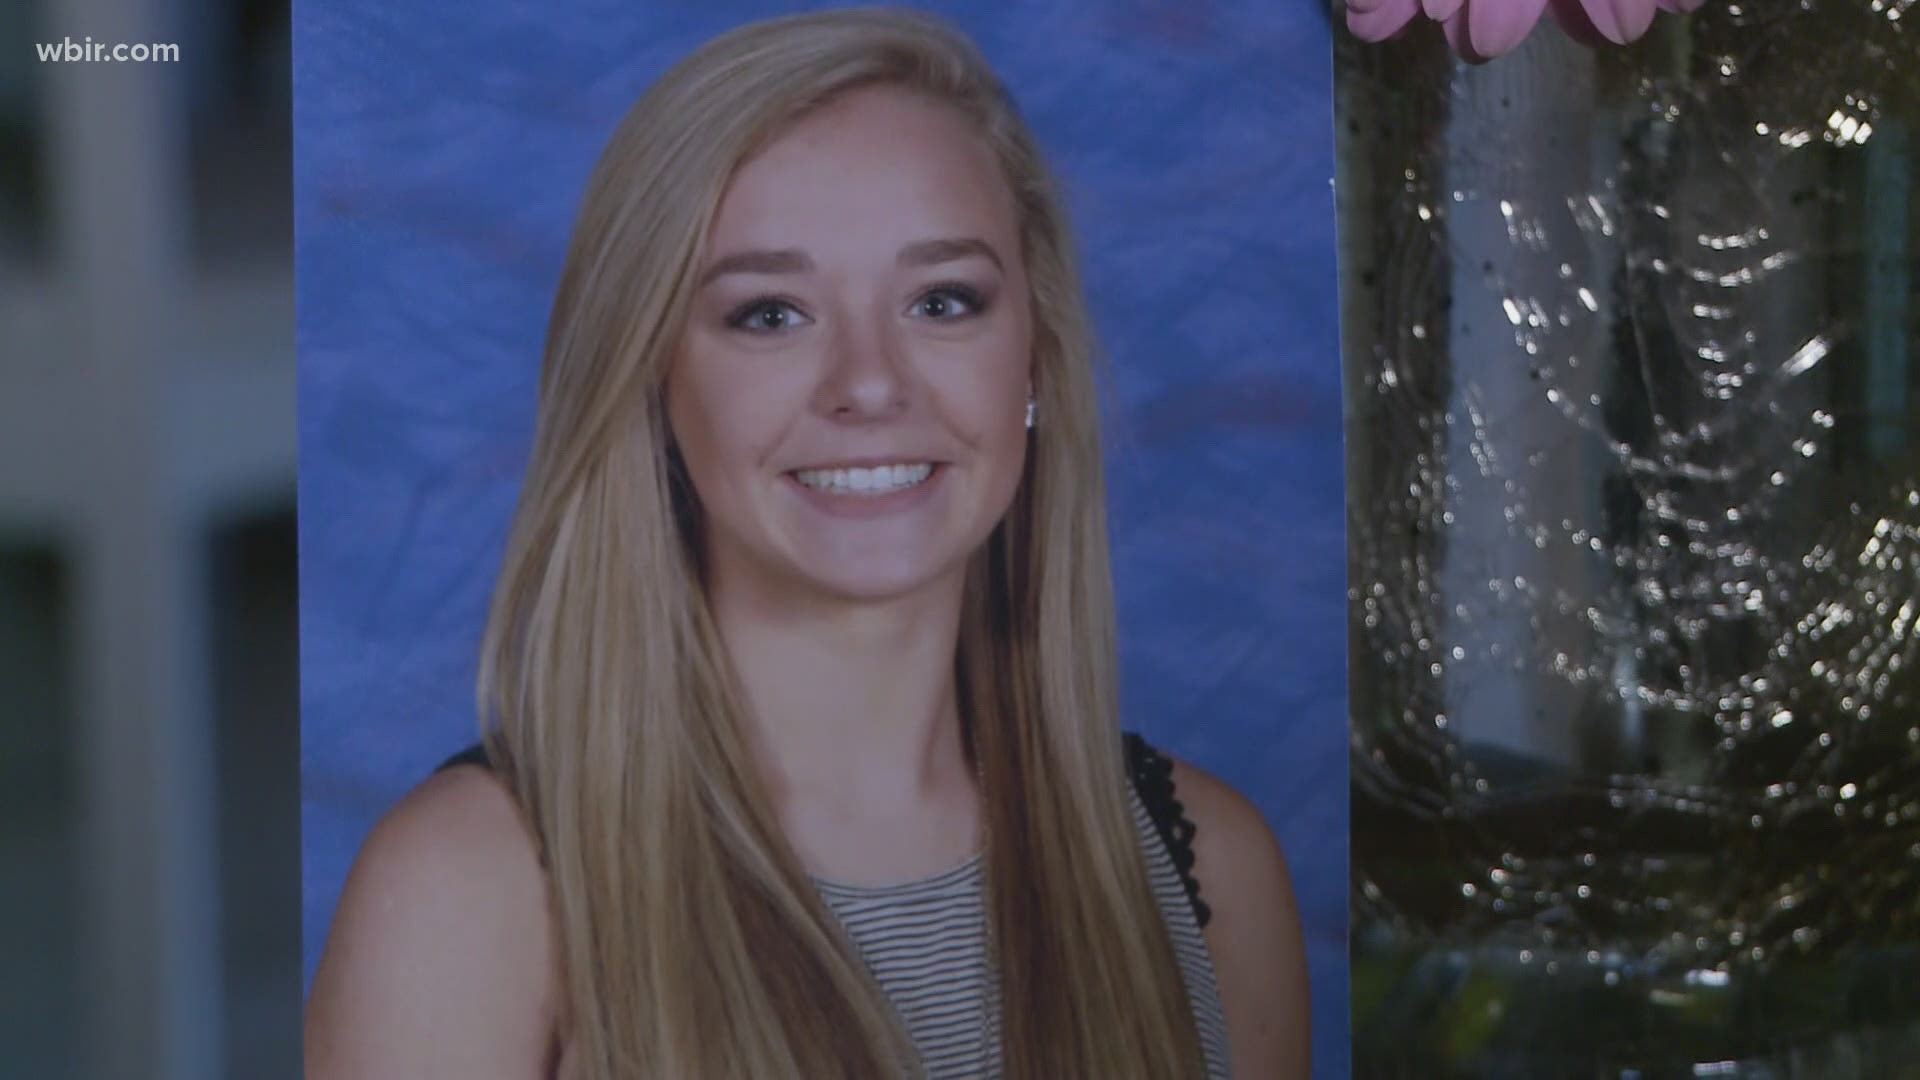 Today marks a day to remember Emma Walker, the East Tennessee teen was shot and killed by her ex-boyfriend in 2016.